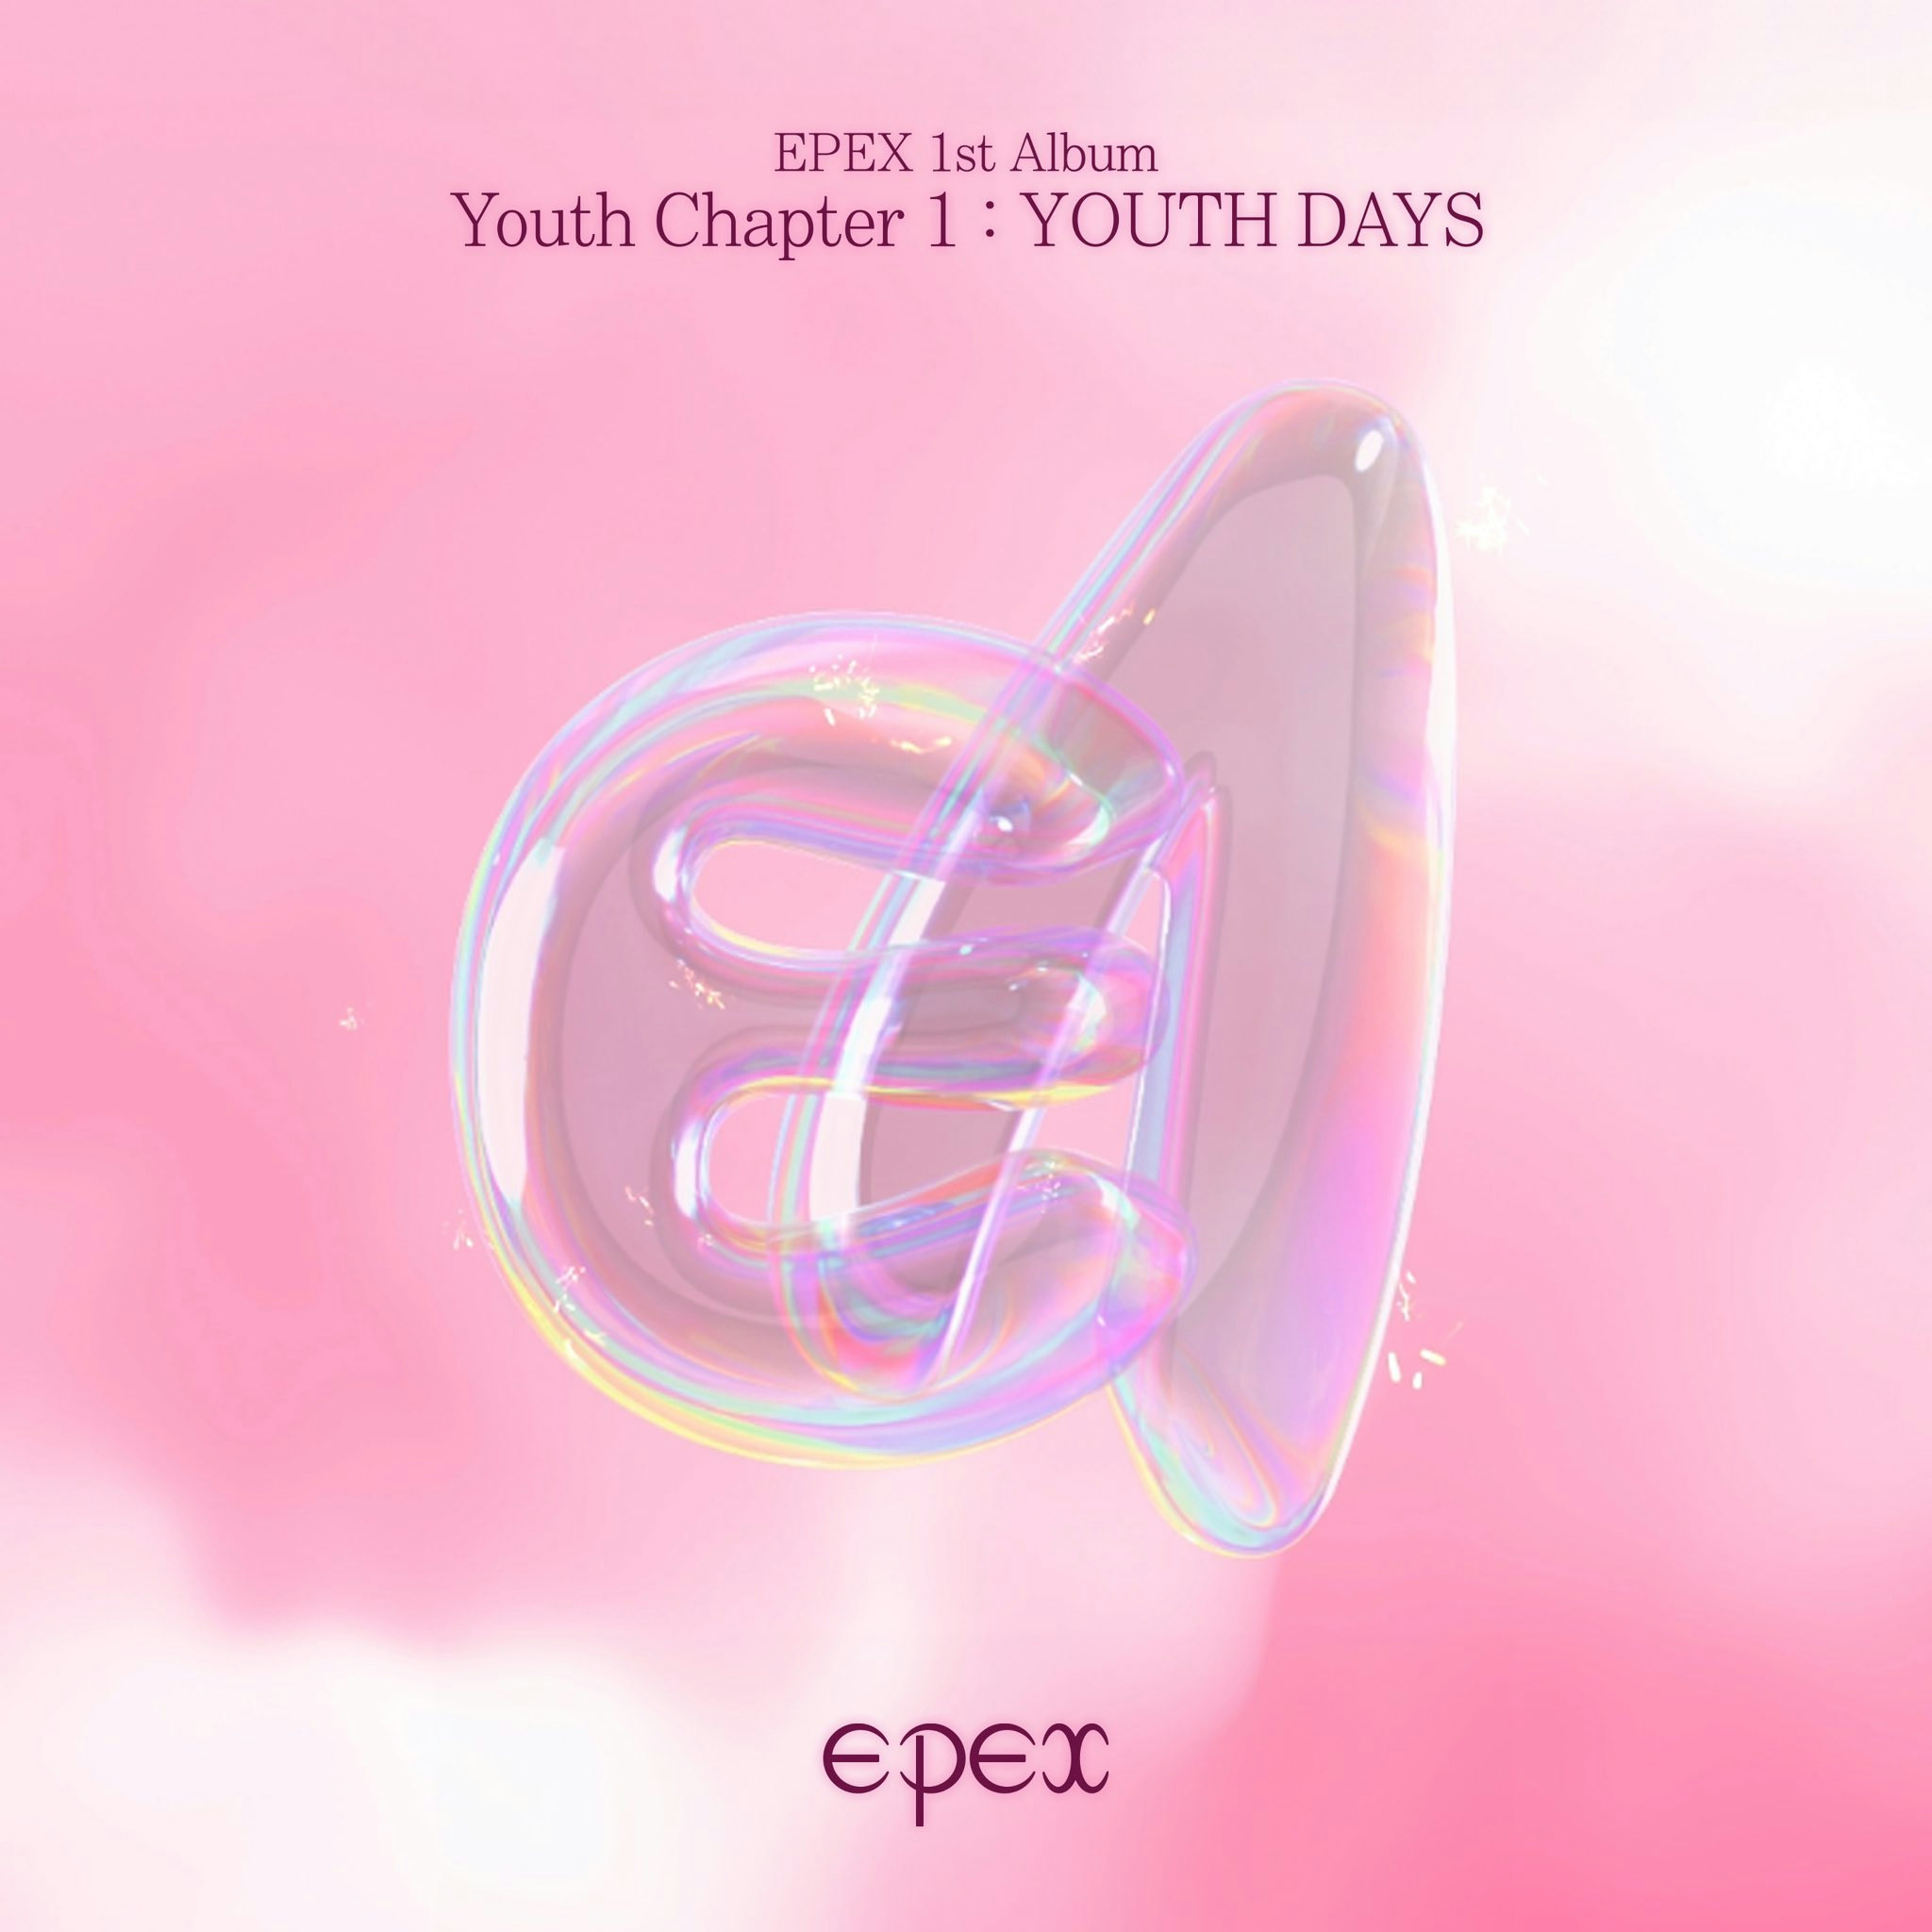 EPEX 1st Album Youth Chapter 1 : YOUTH DAYS - EPEX JAPAN OFFICIAL ...